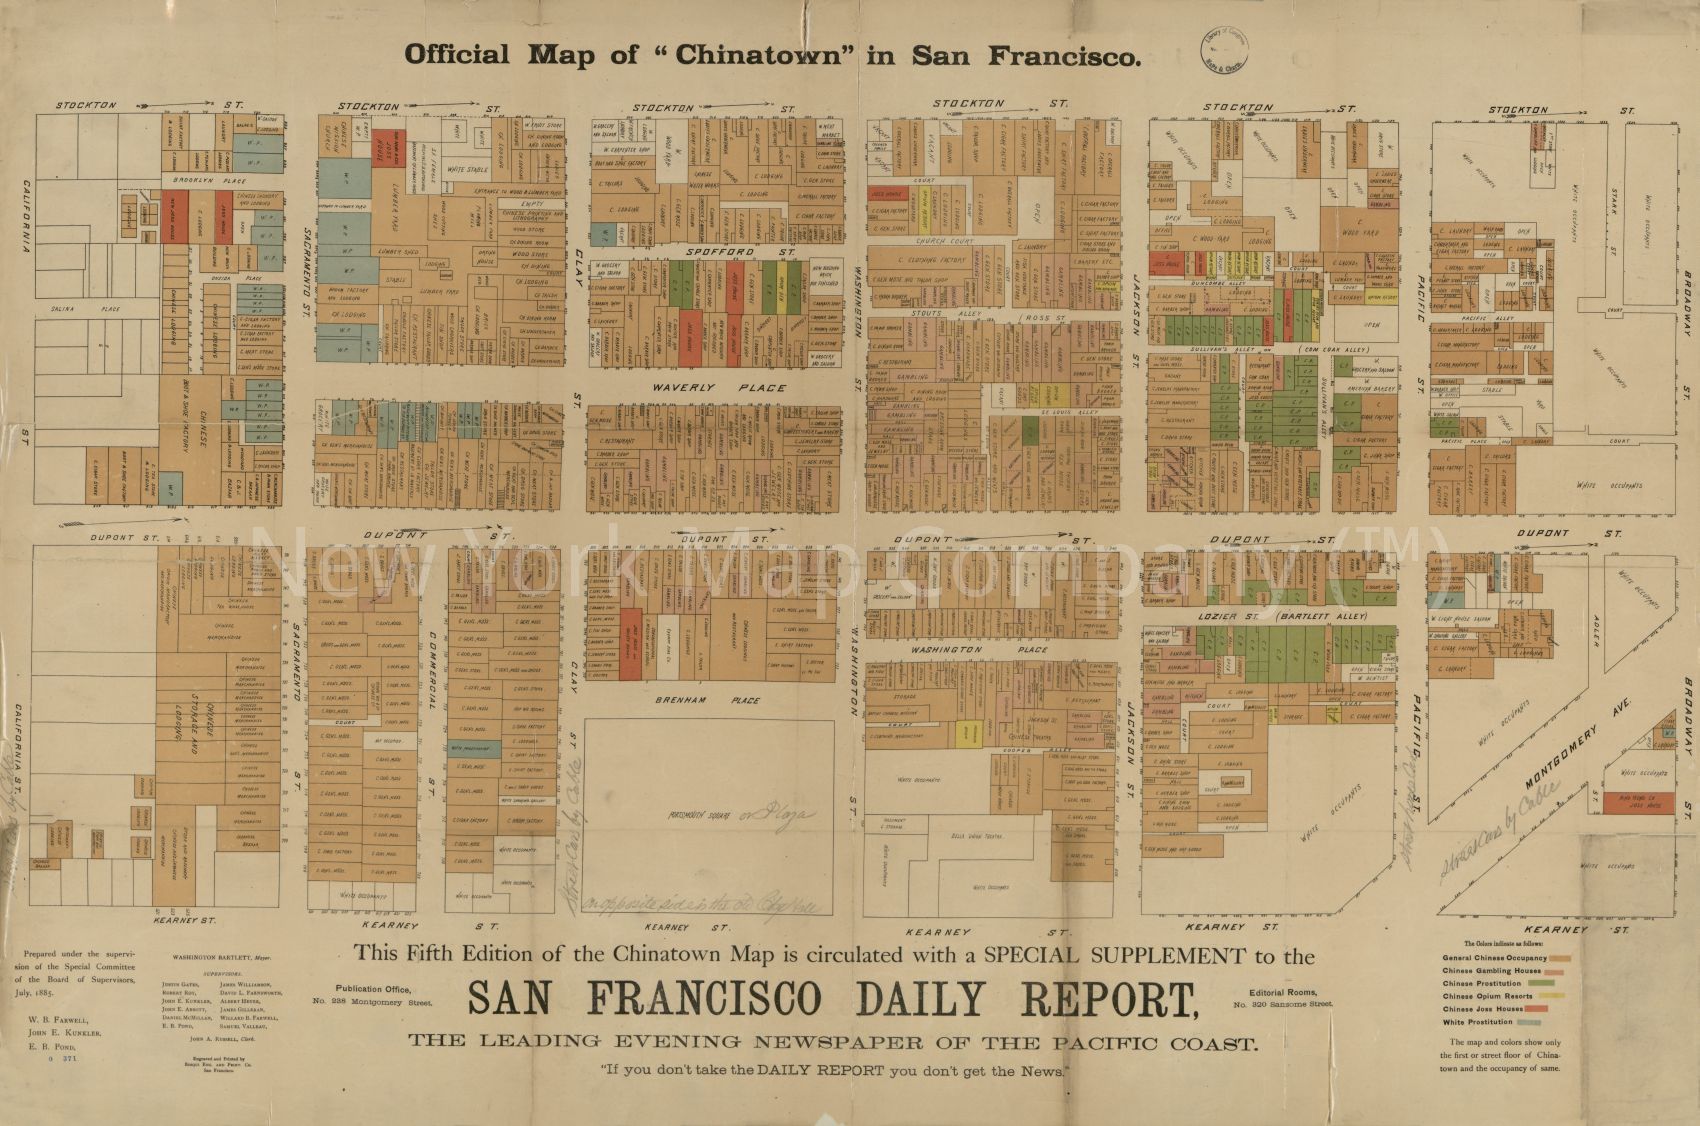 1998 map Official map of "Chinatown" in San Francisco Chinese occupancy,. Map Subjects: Cadastral California | Chinatown | Chinatown San Francisco | Calif | Landowners | Real Property | San Francisco |